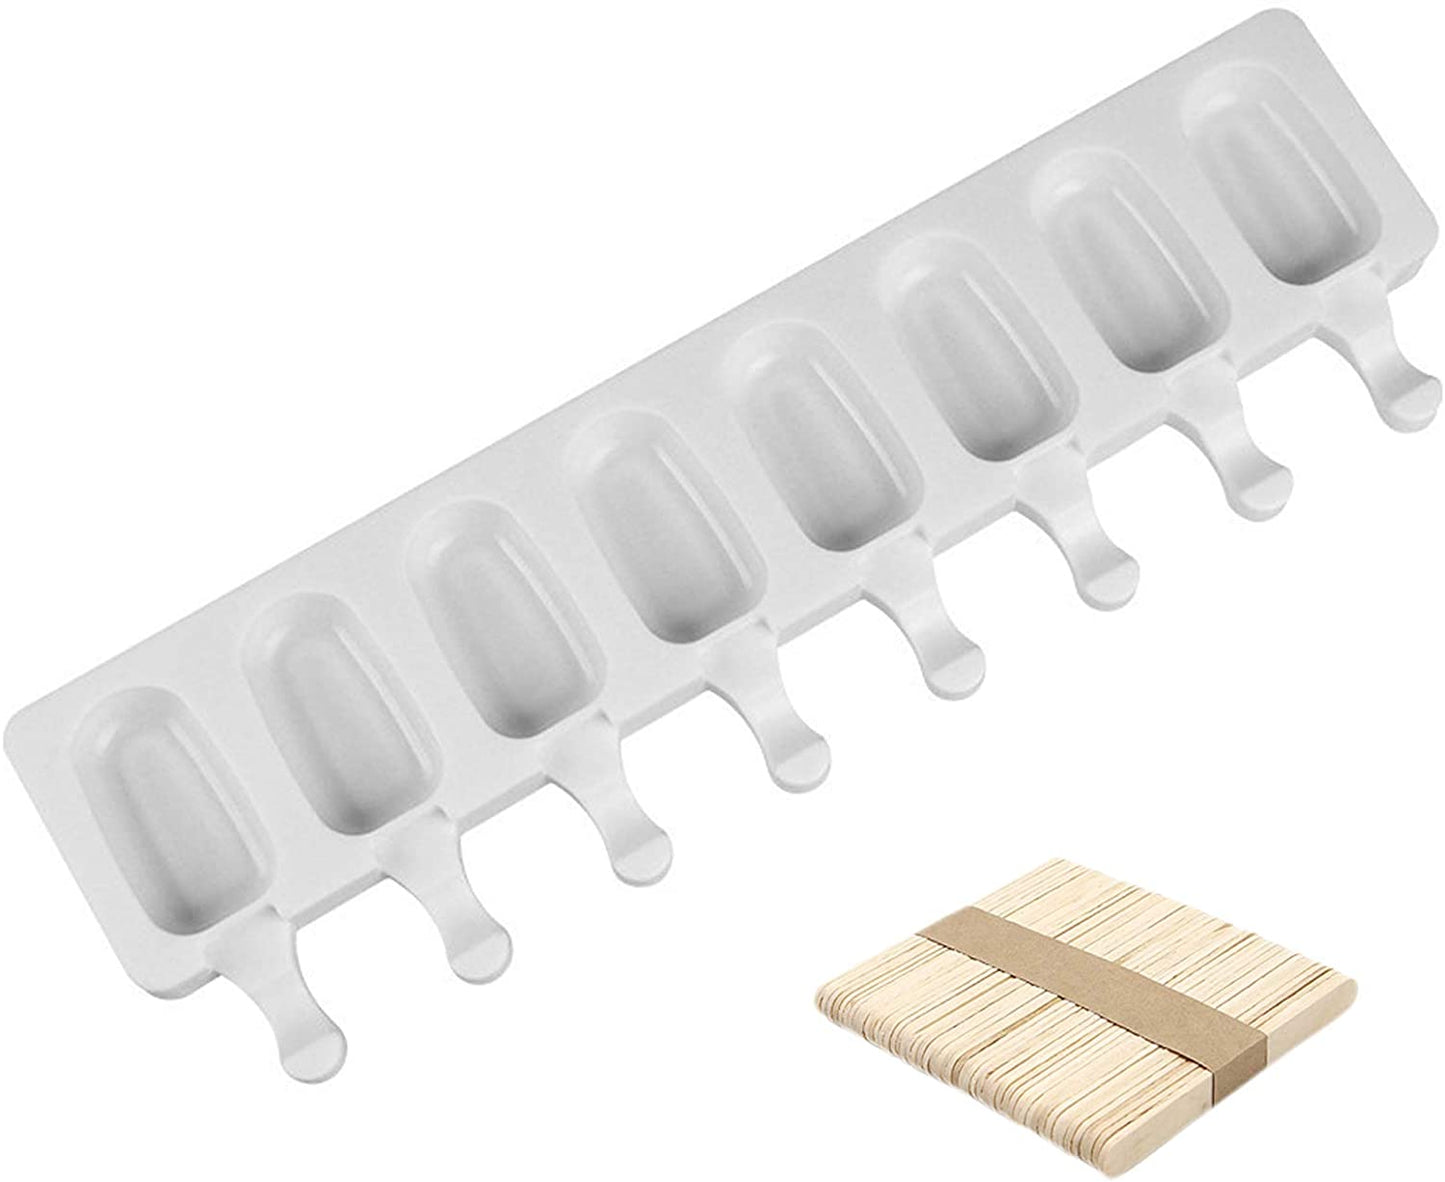 Silicon Cakesicles Popsicles Mold 8 Cavity With Stick – Bakers